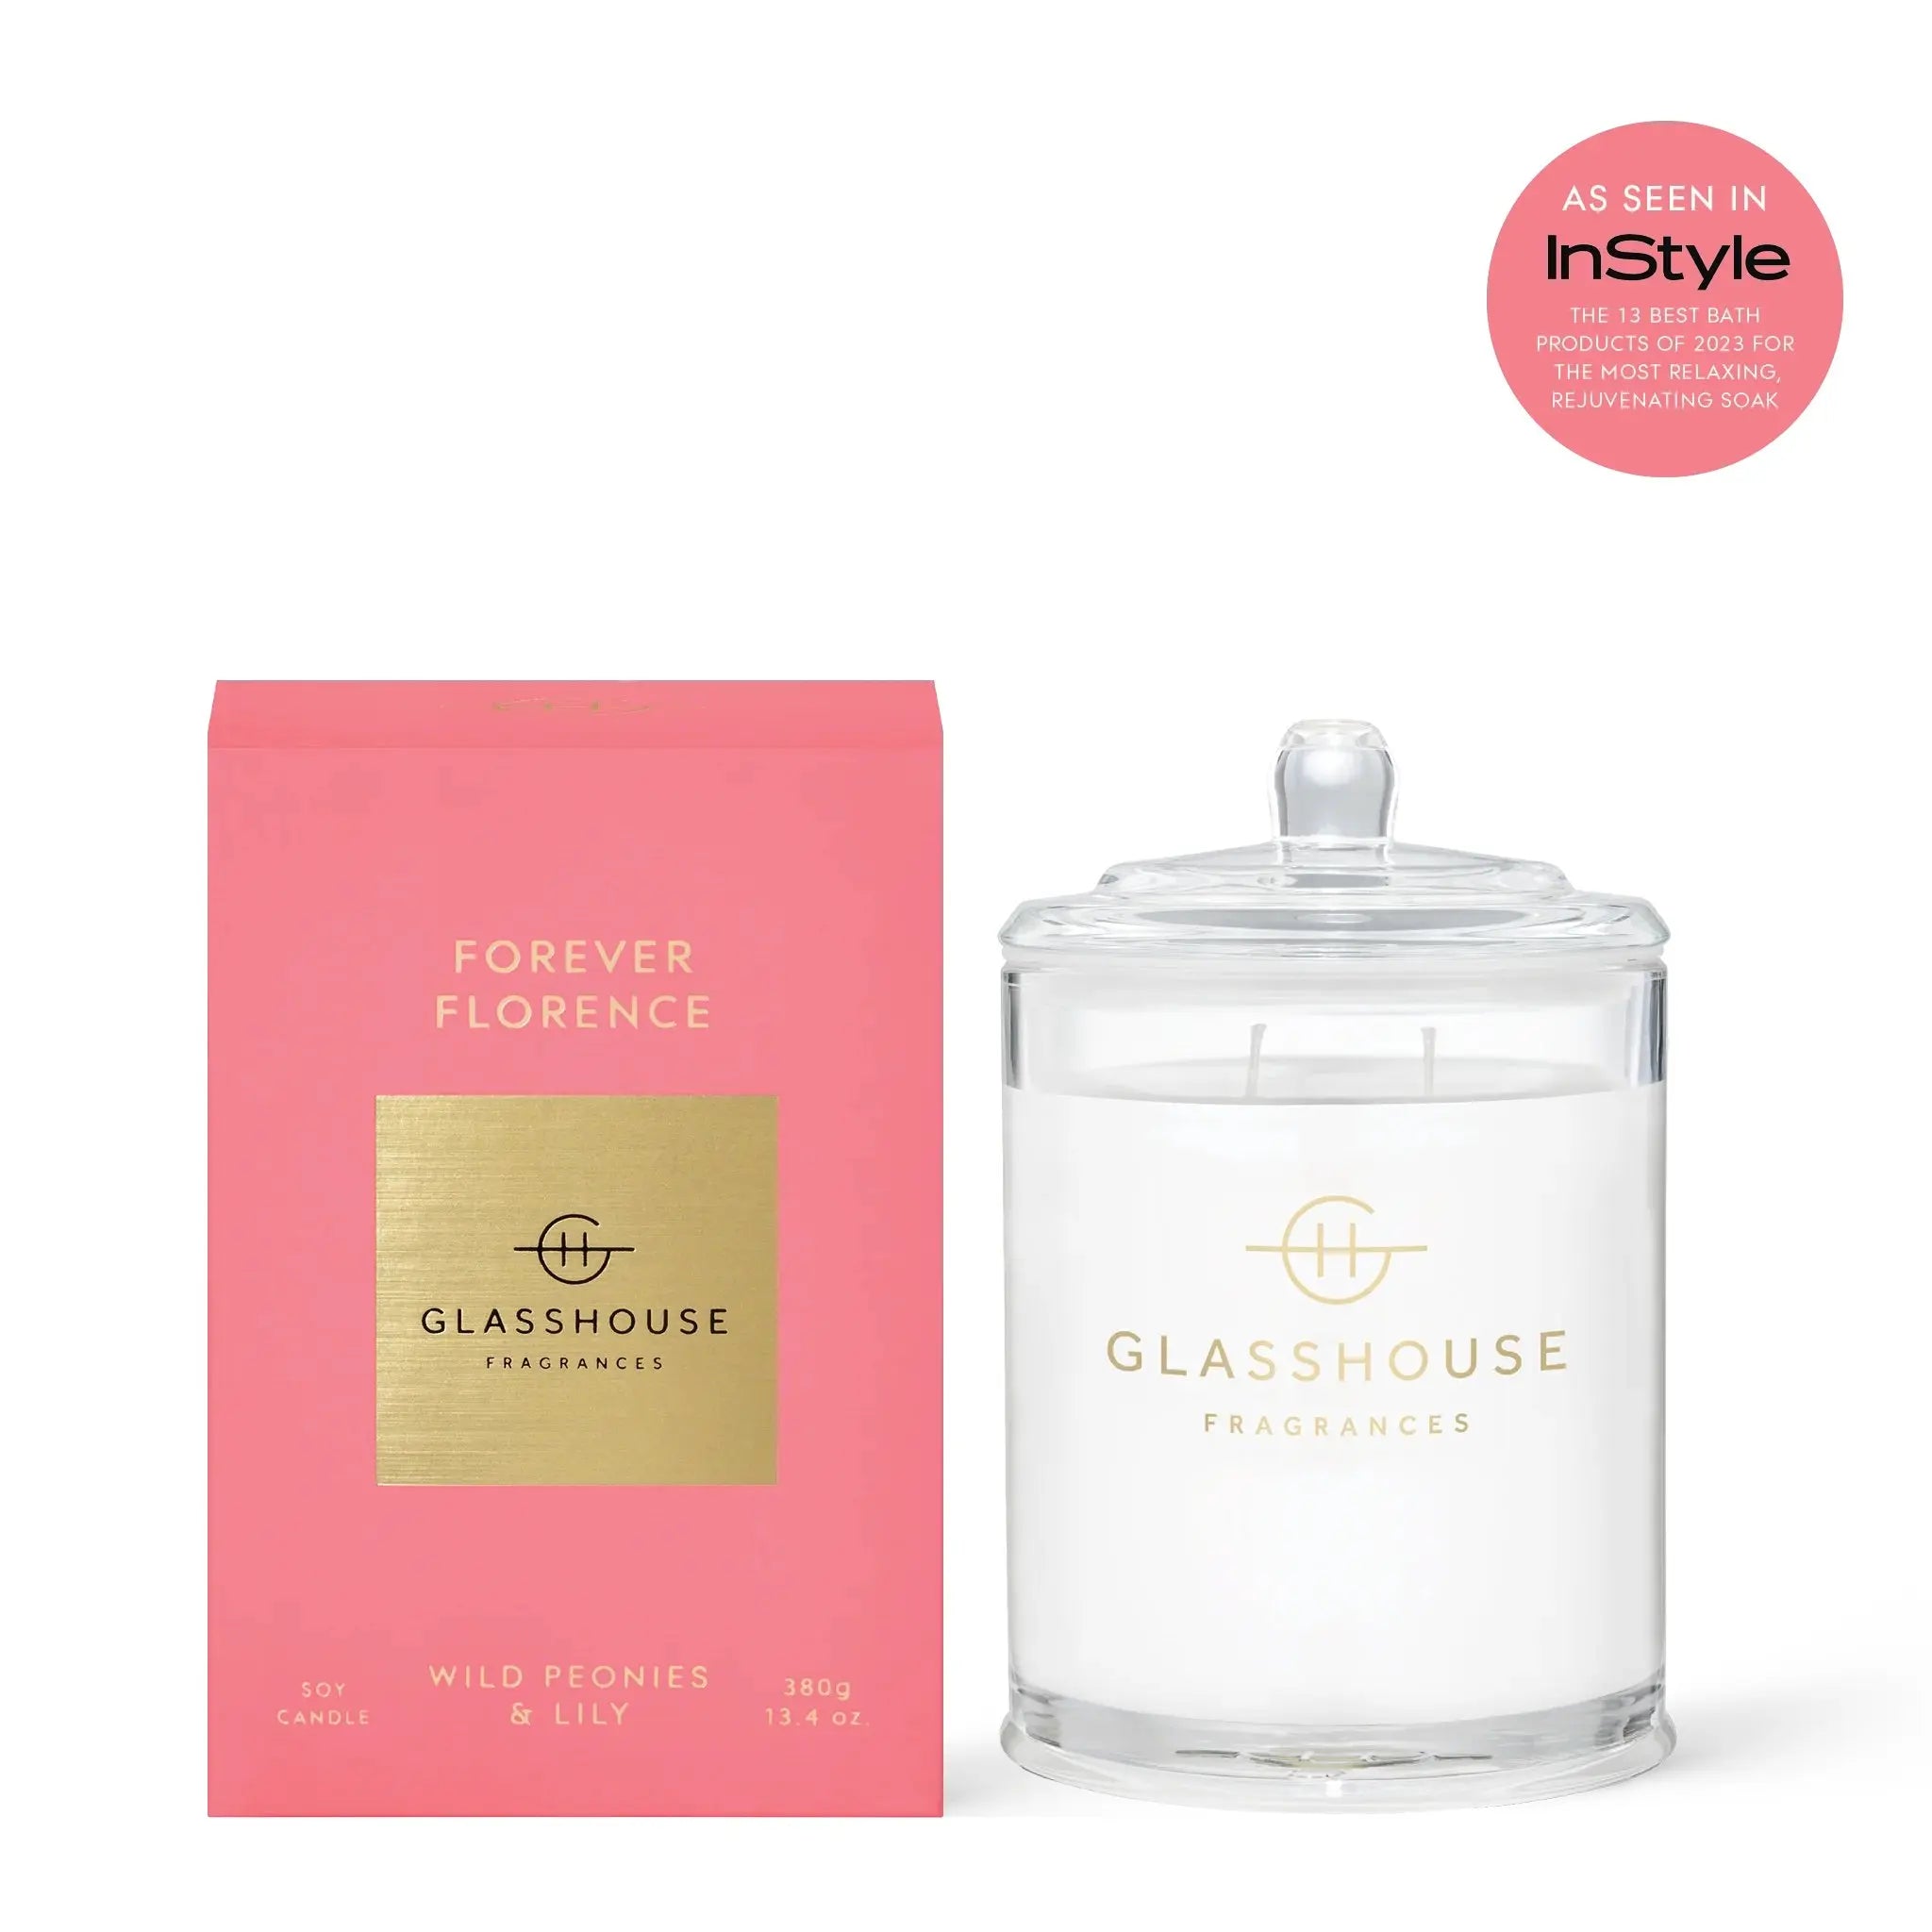 Glasshouse Fragrances Forever Florence Soy Candle Wild Peonies and Lily 380 grams 13.4 ounces As seen in InStyle The thirteen best bath products of 2023 for the most relaxing, rejuvenating soak